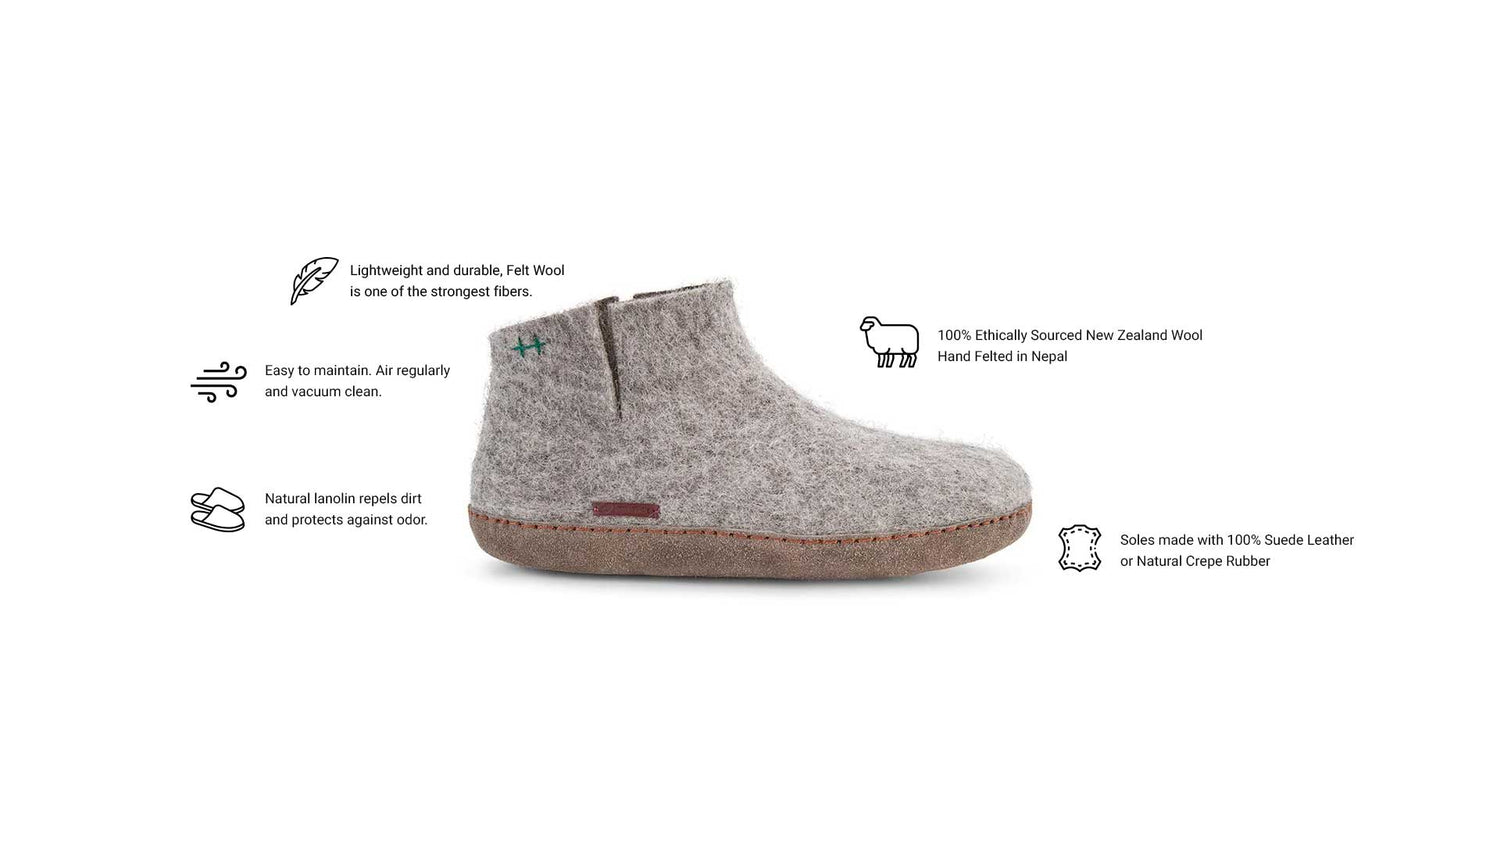 Betterfelt Slipper Diagram That Highlights Our Product Attributes Including Lightweight And Durable, Easy To Maintain, Uses Ethically Sourced New Zealand Wool, Made In Nepal, Fair Trade Certified.